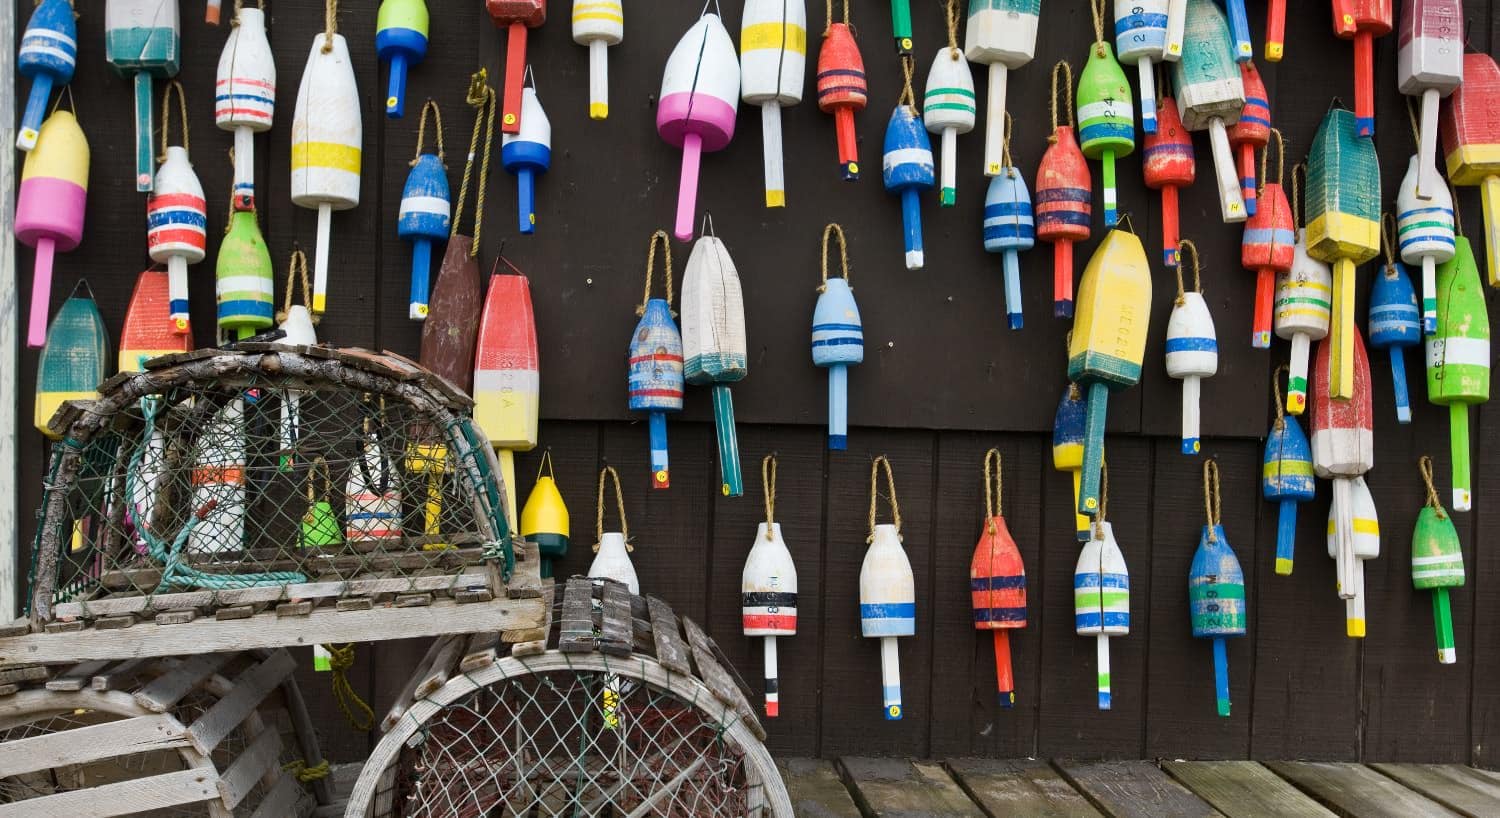 Outdoor wooden wall hanging colorful wooden buoys and a few old lobster traps sitting on the deck